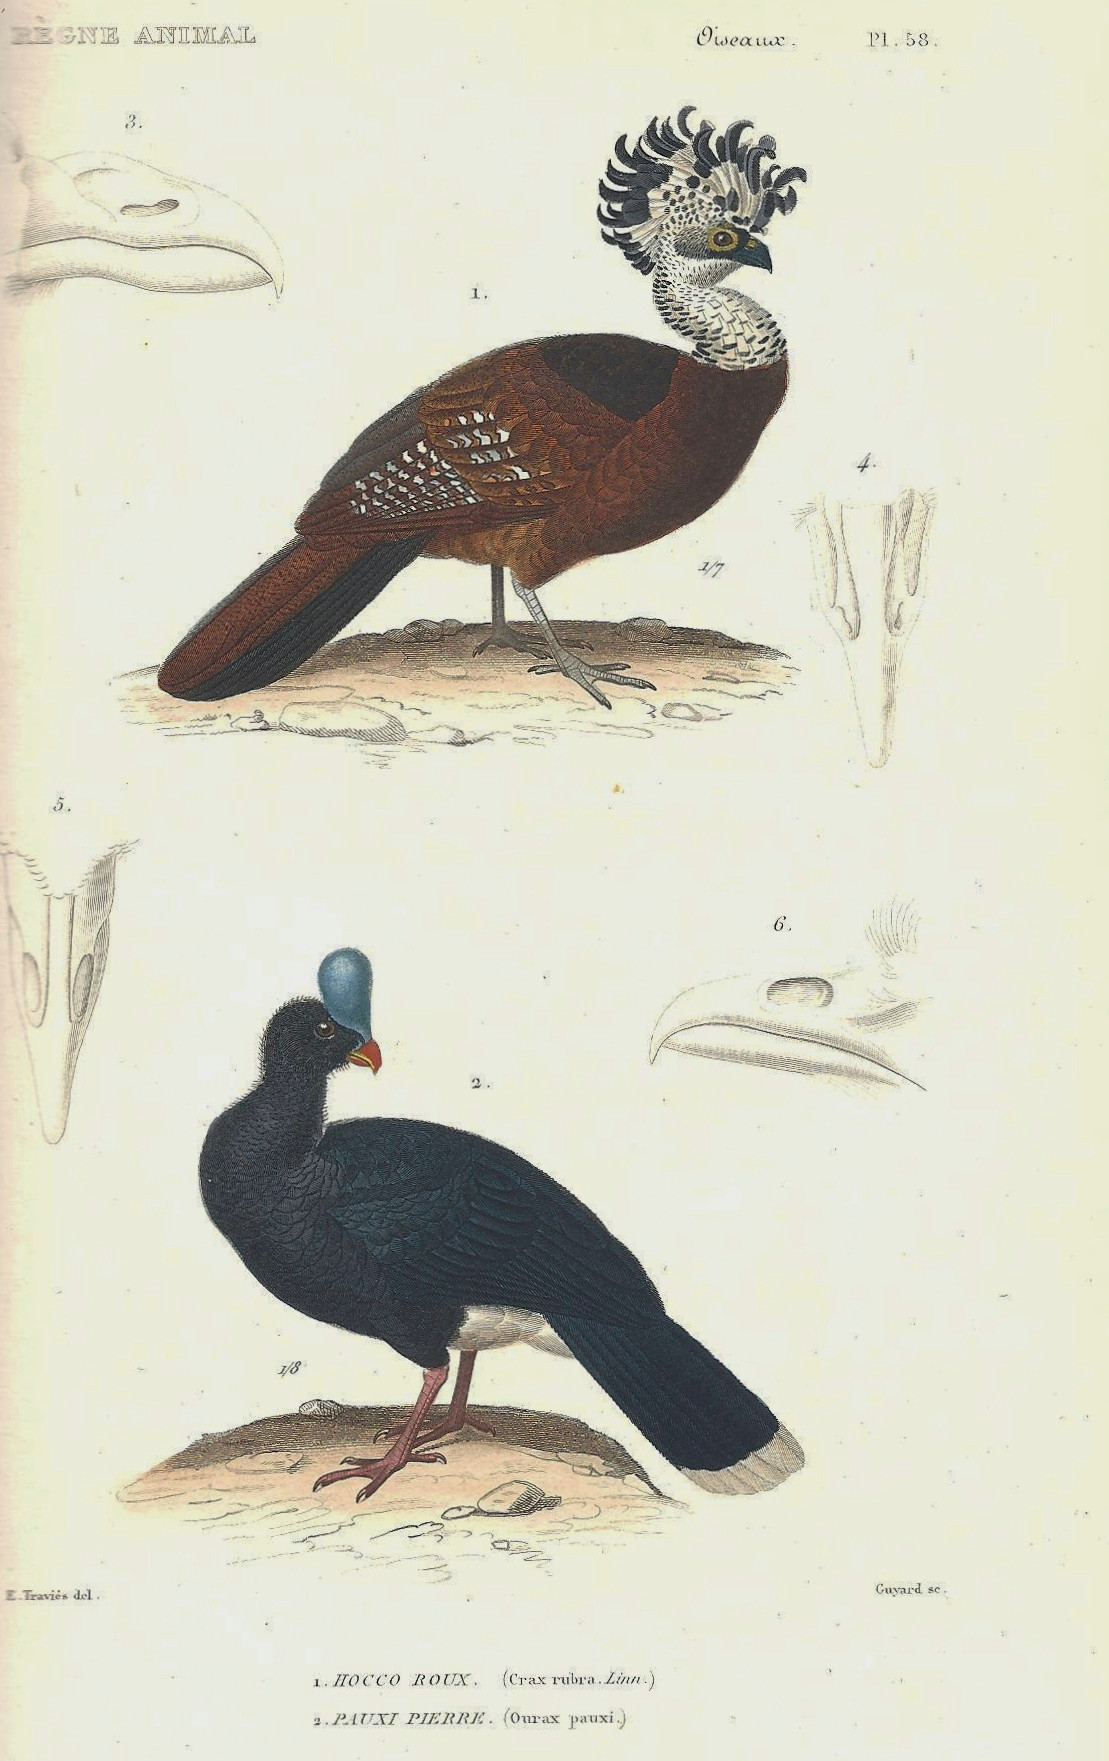 Turkey Animal Drawing File Cuvier 58 Hocco Et Hocco A Pierre Jpg Wikimedia Commons